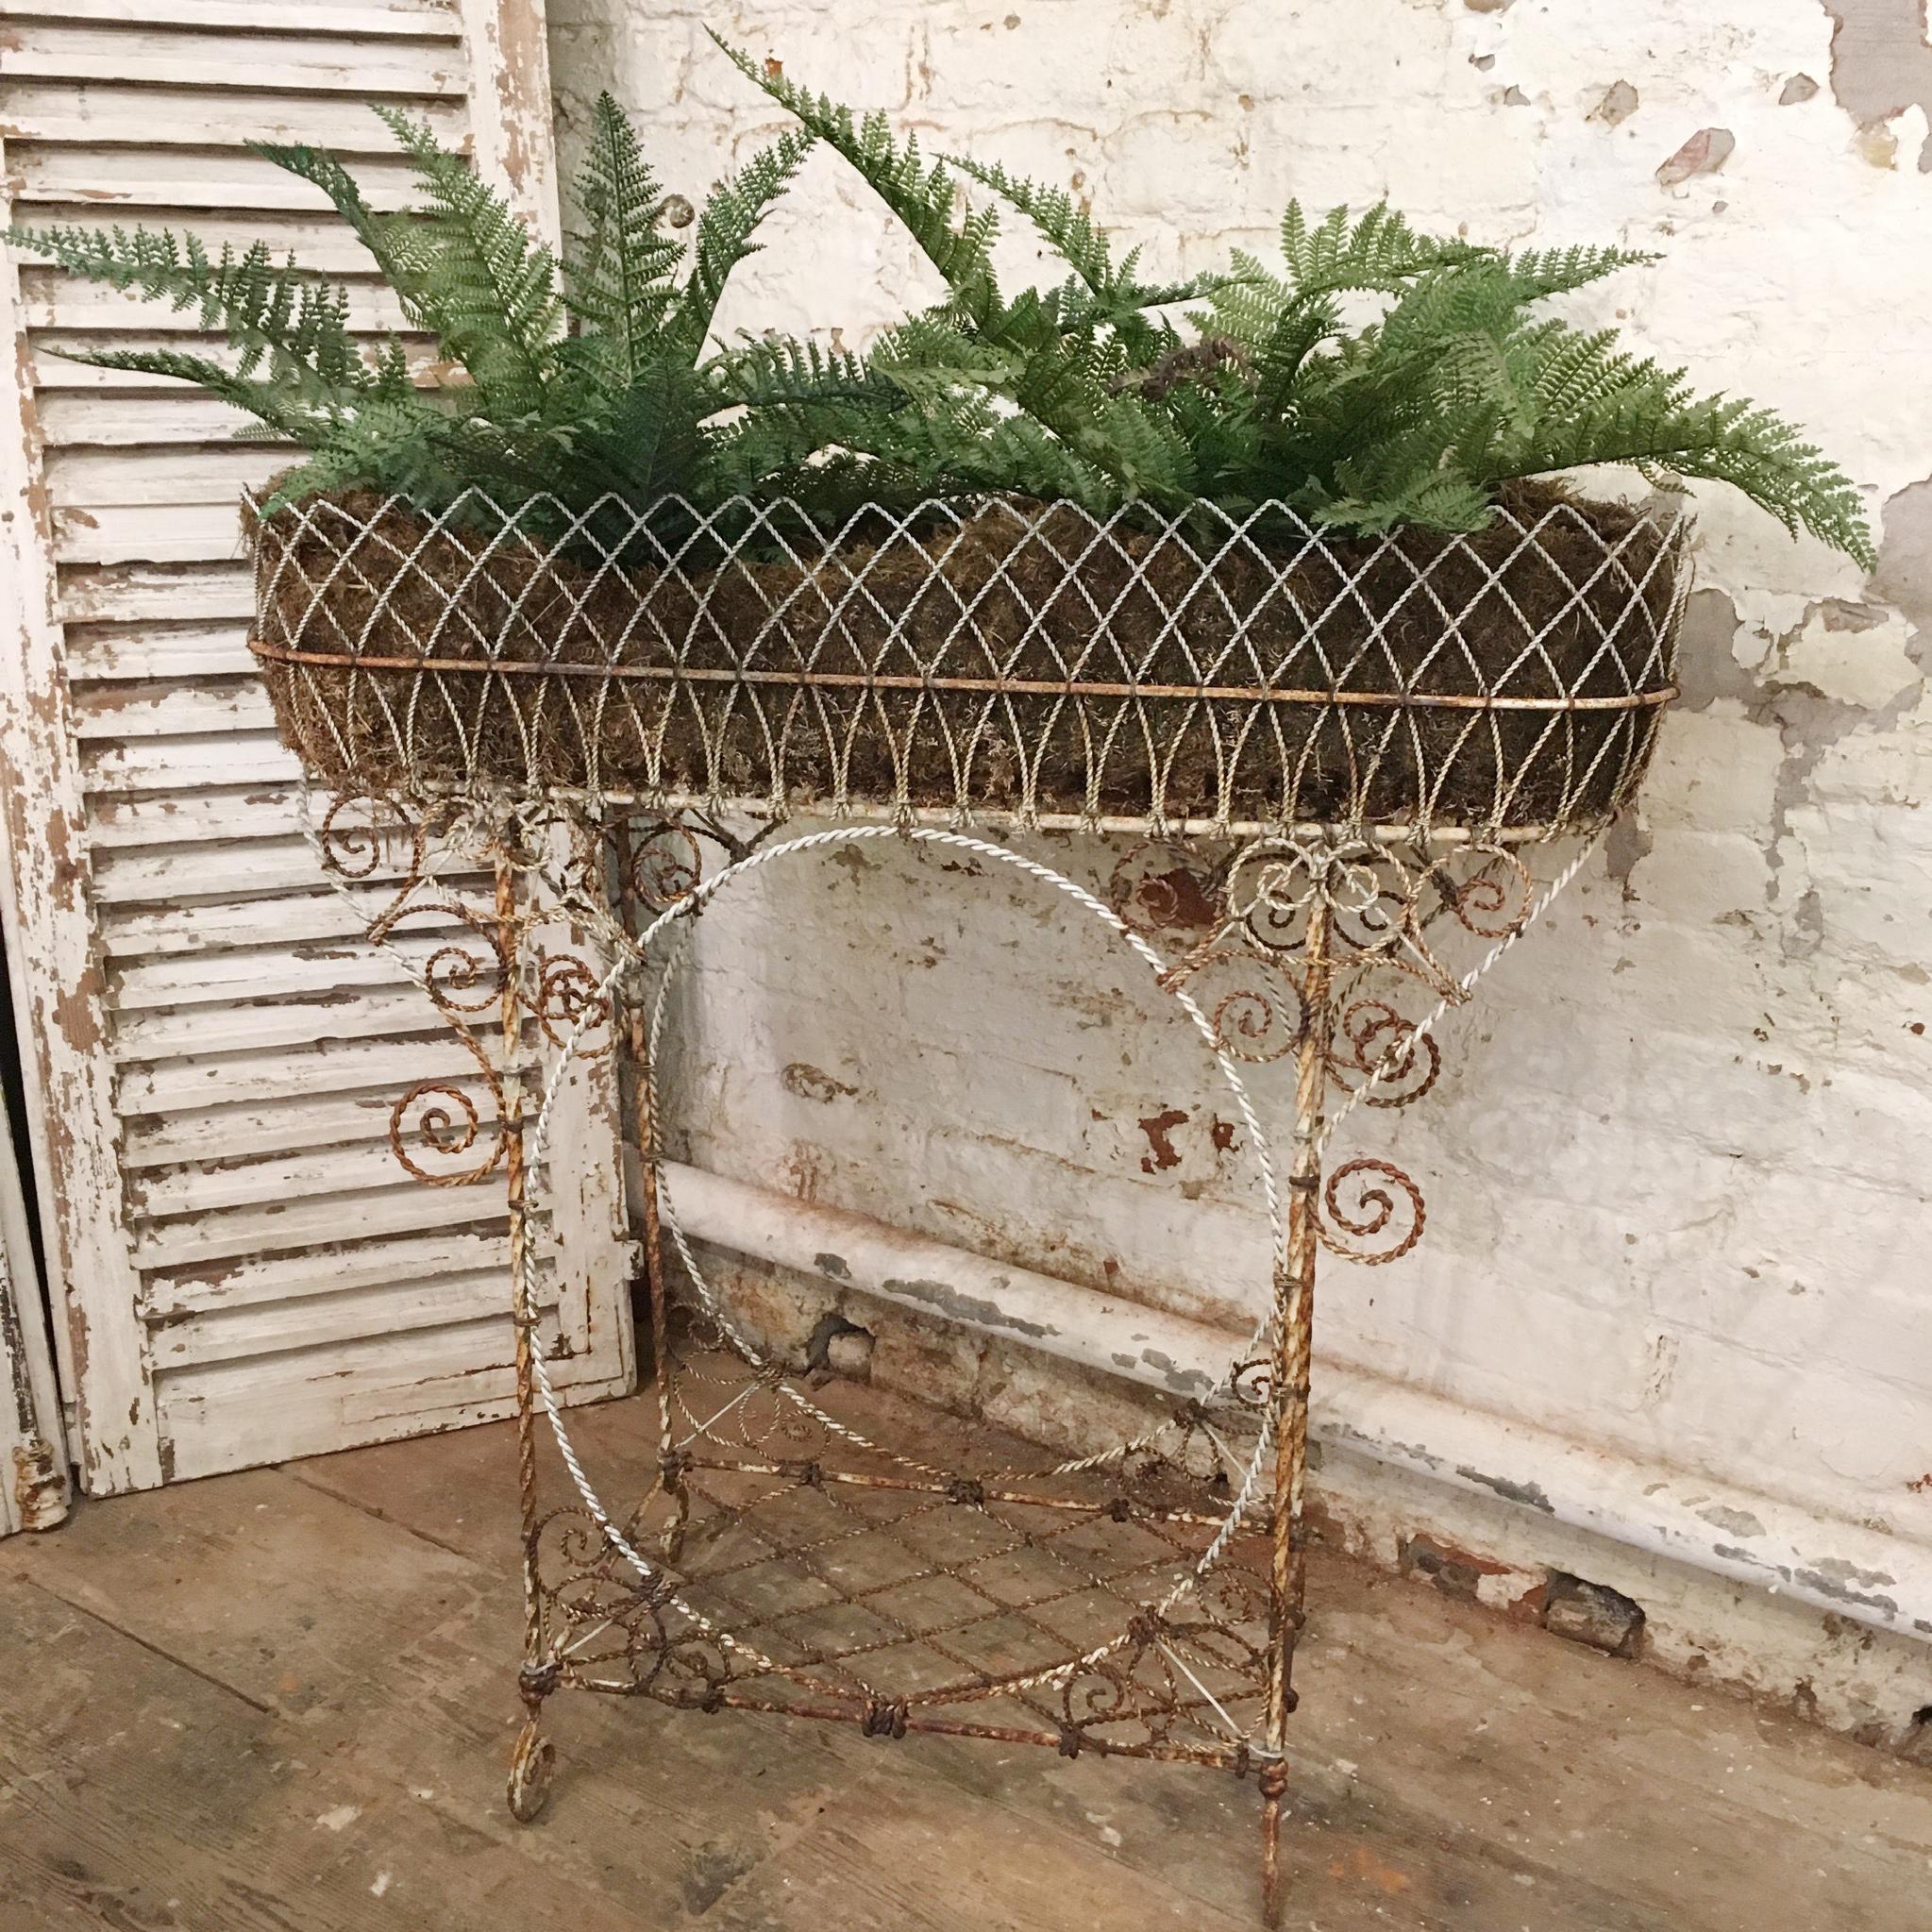 This twisted wirework jardinière plant stand is made from many pieces of interwoven wire strands, over decorated with loops and swirls. French origin. It has one main basket at the top with vintage mossy lining, the stand also has a lower shelf for